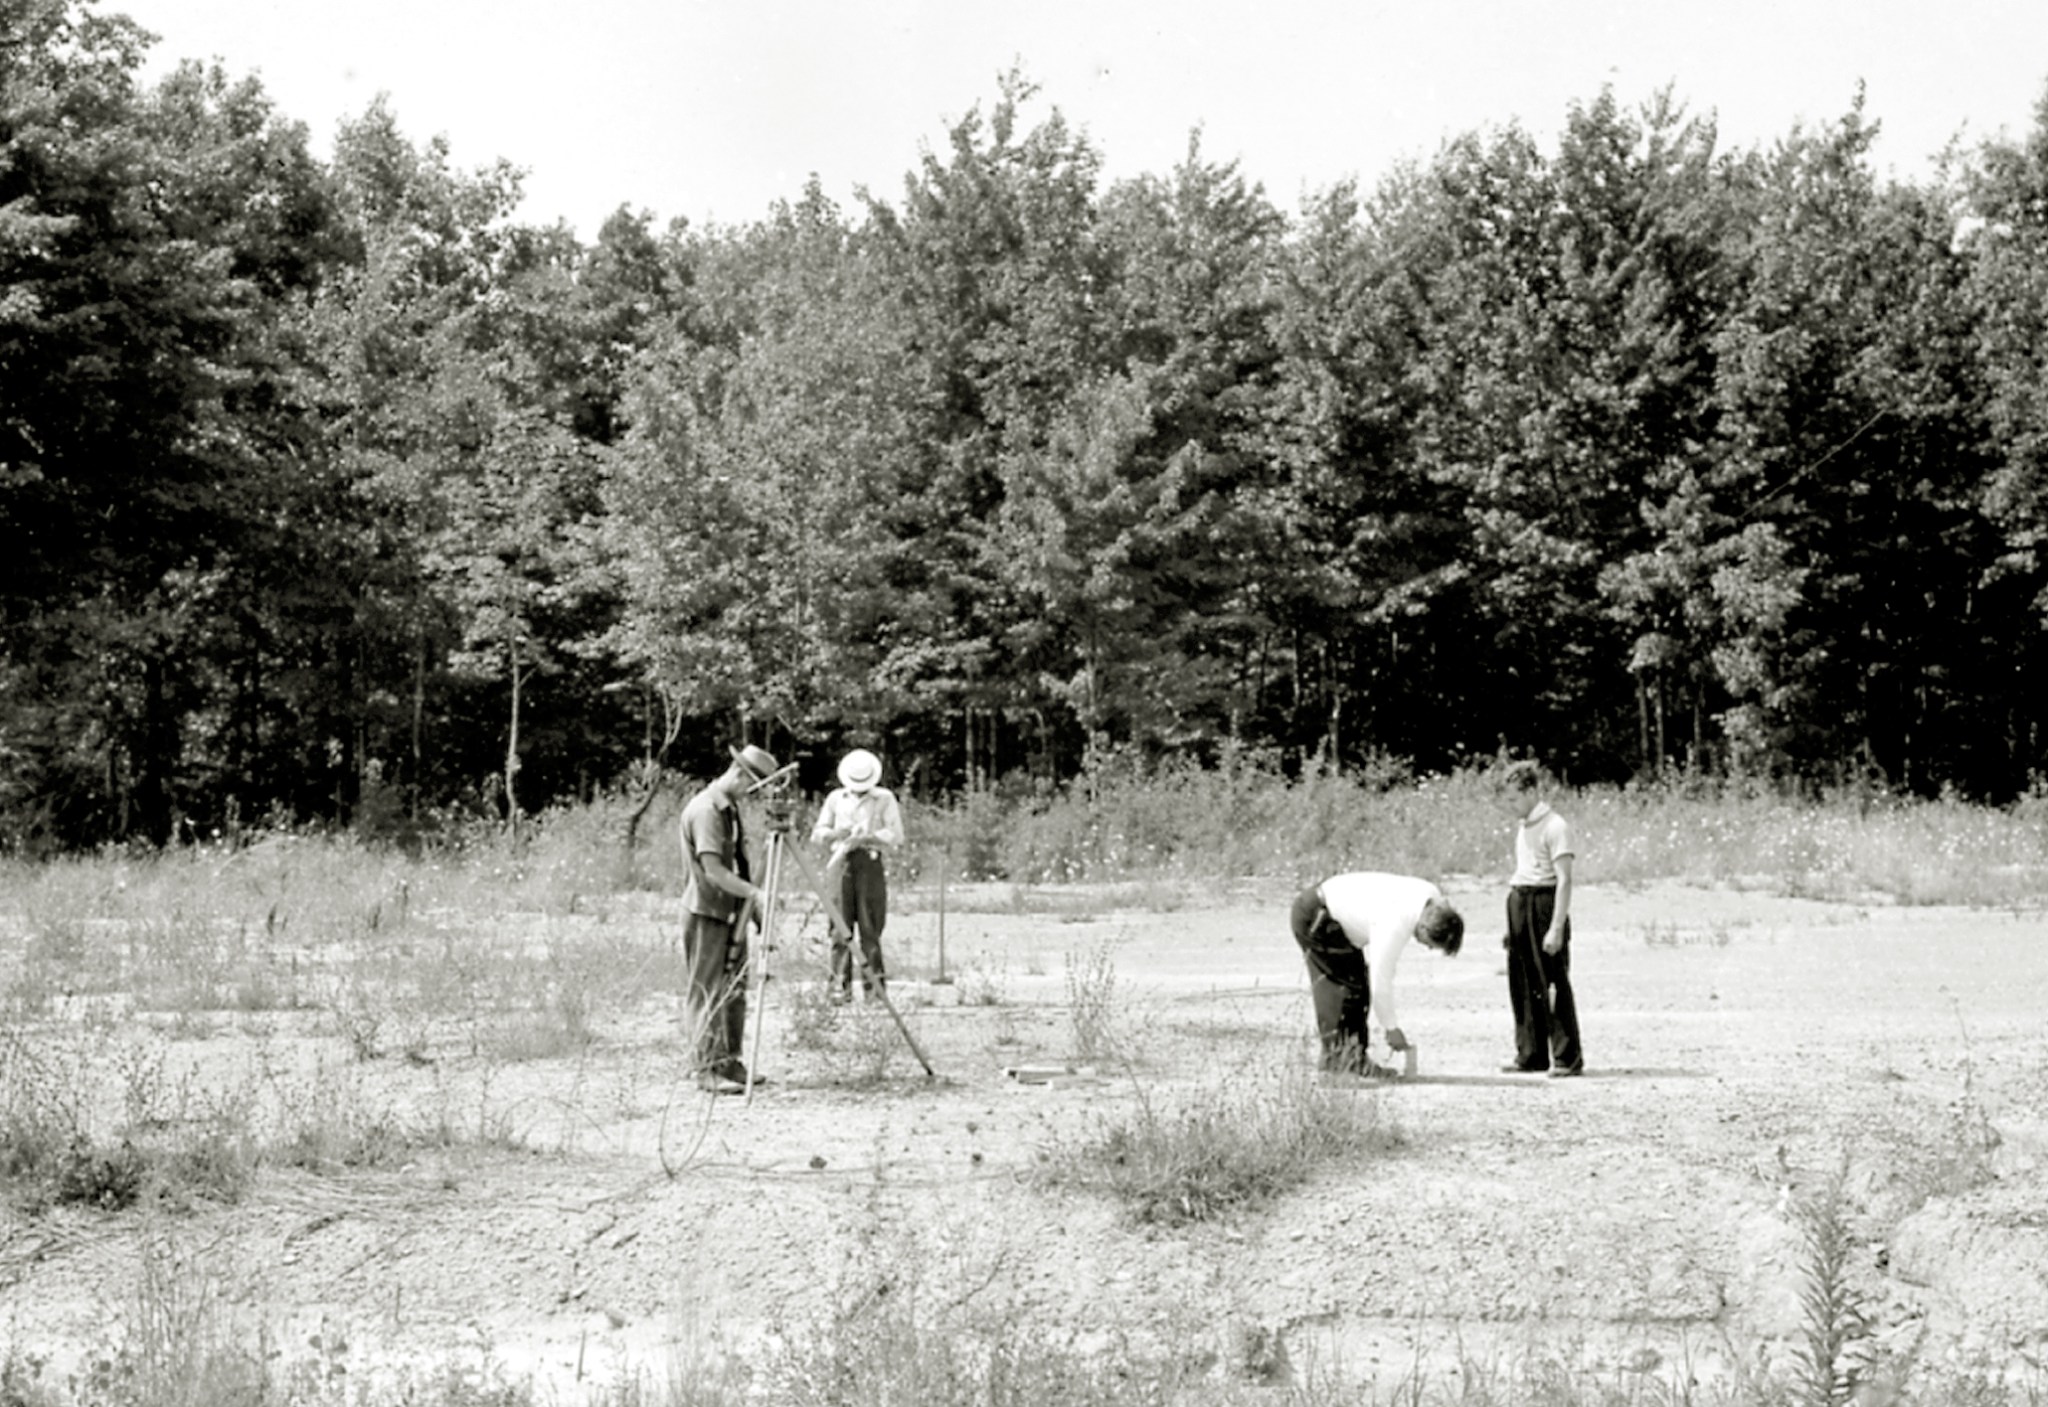 Men in field with surveying equipment